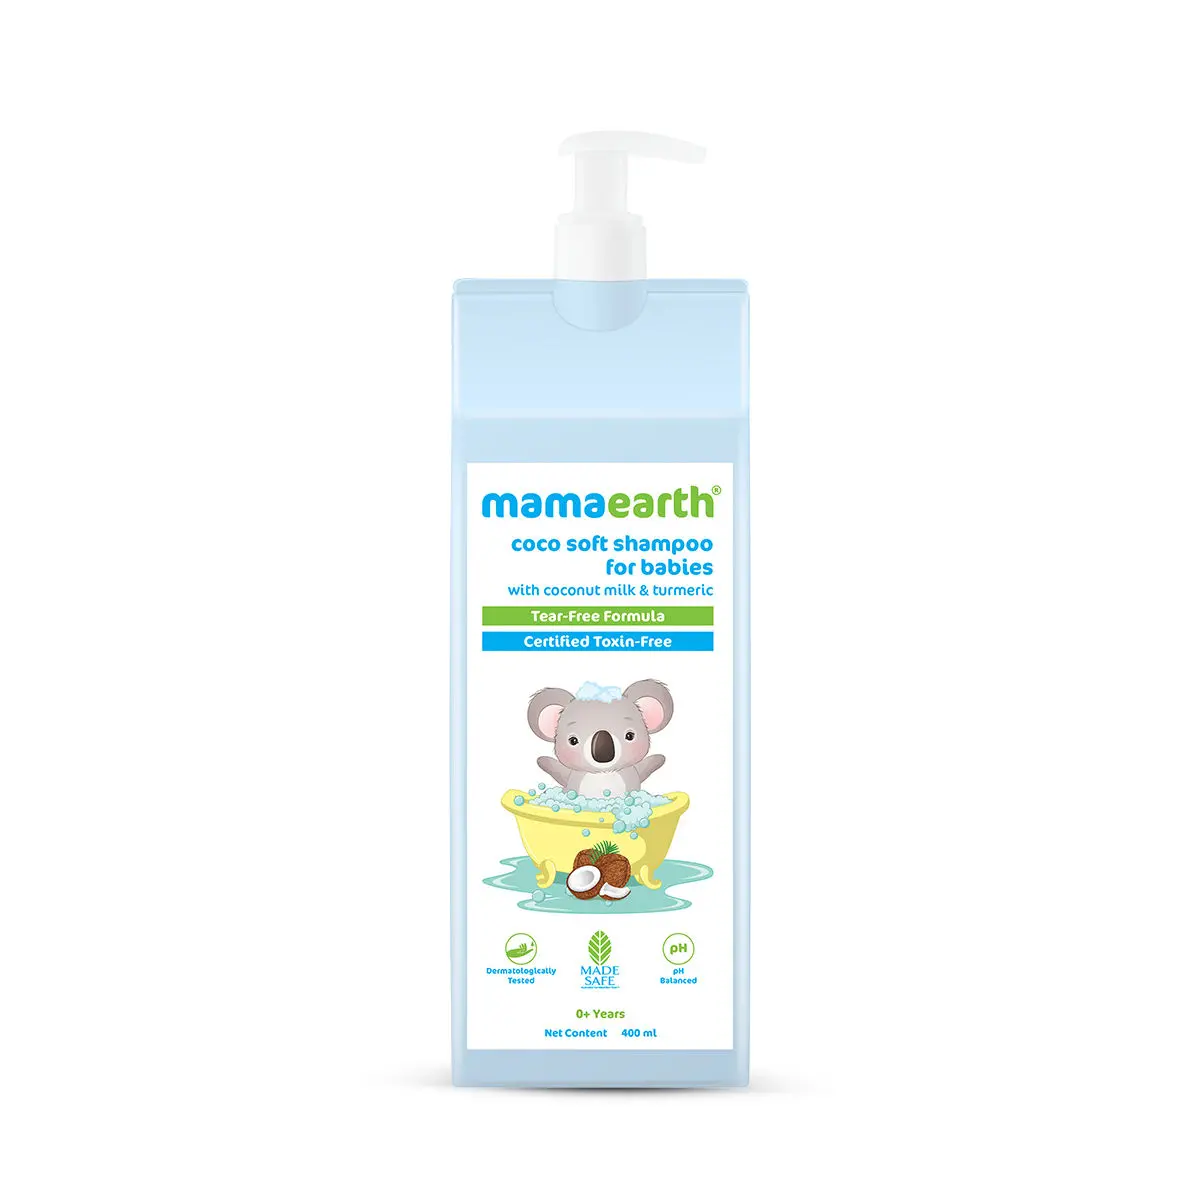 Mamaearth Coco Soft Shampoo with Coconut Milk & Turmeric, for babies, for Gentle Cleansing (400 ml)